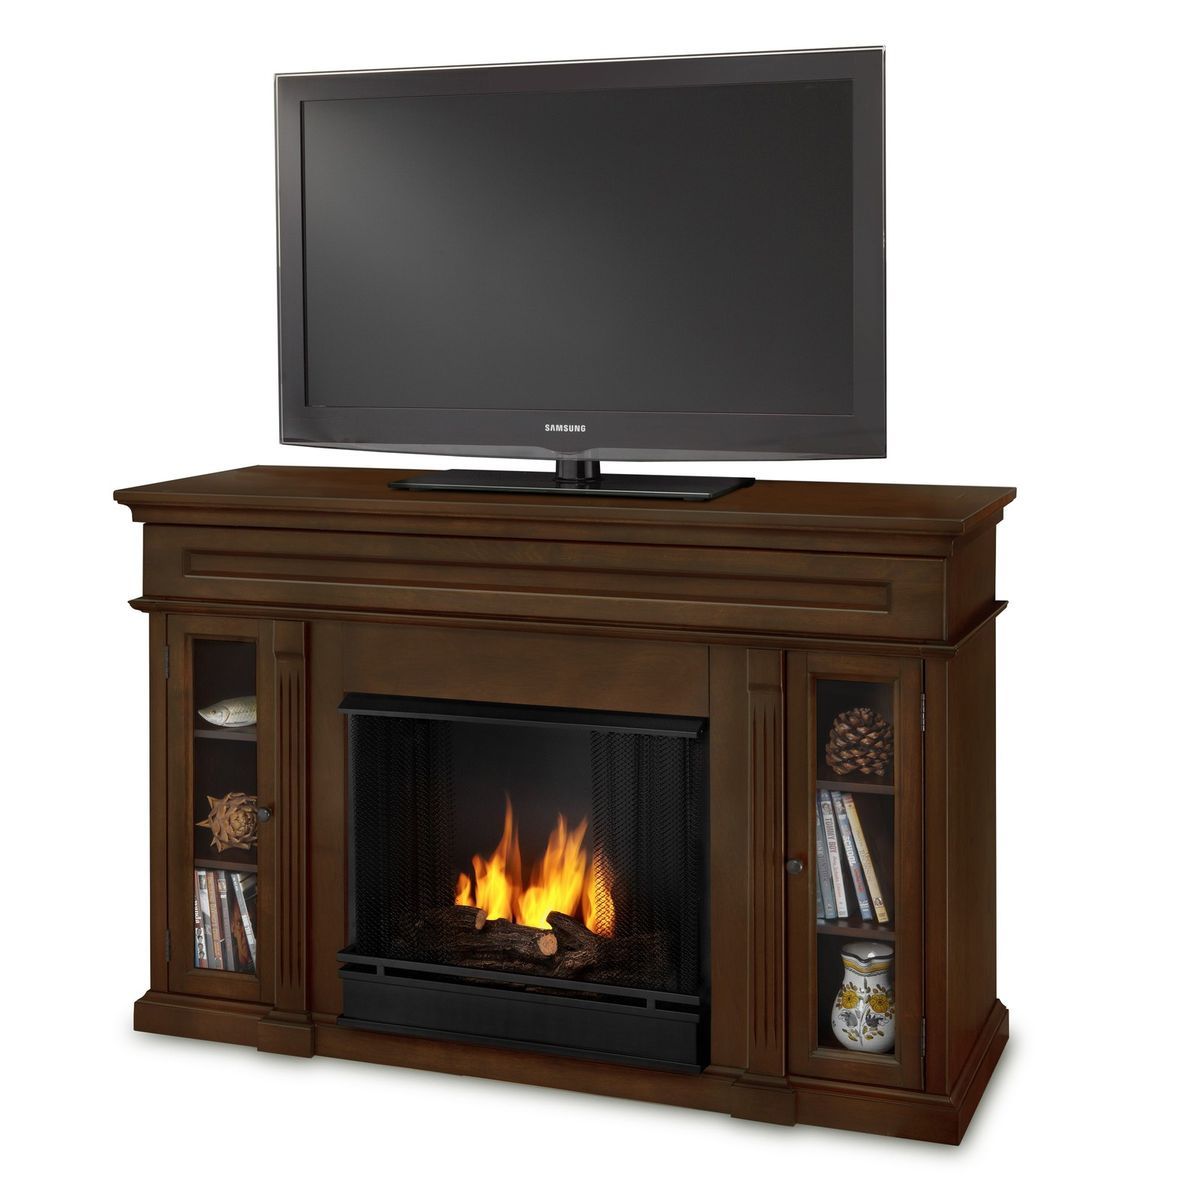 The Lannon Ventless Real Flame Gel Fireplace   Lannon Ventless Gel